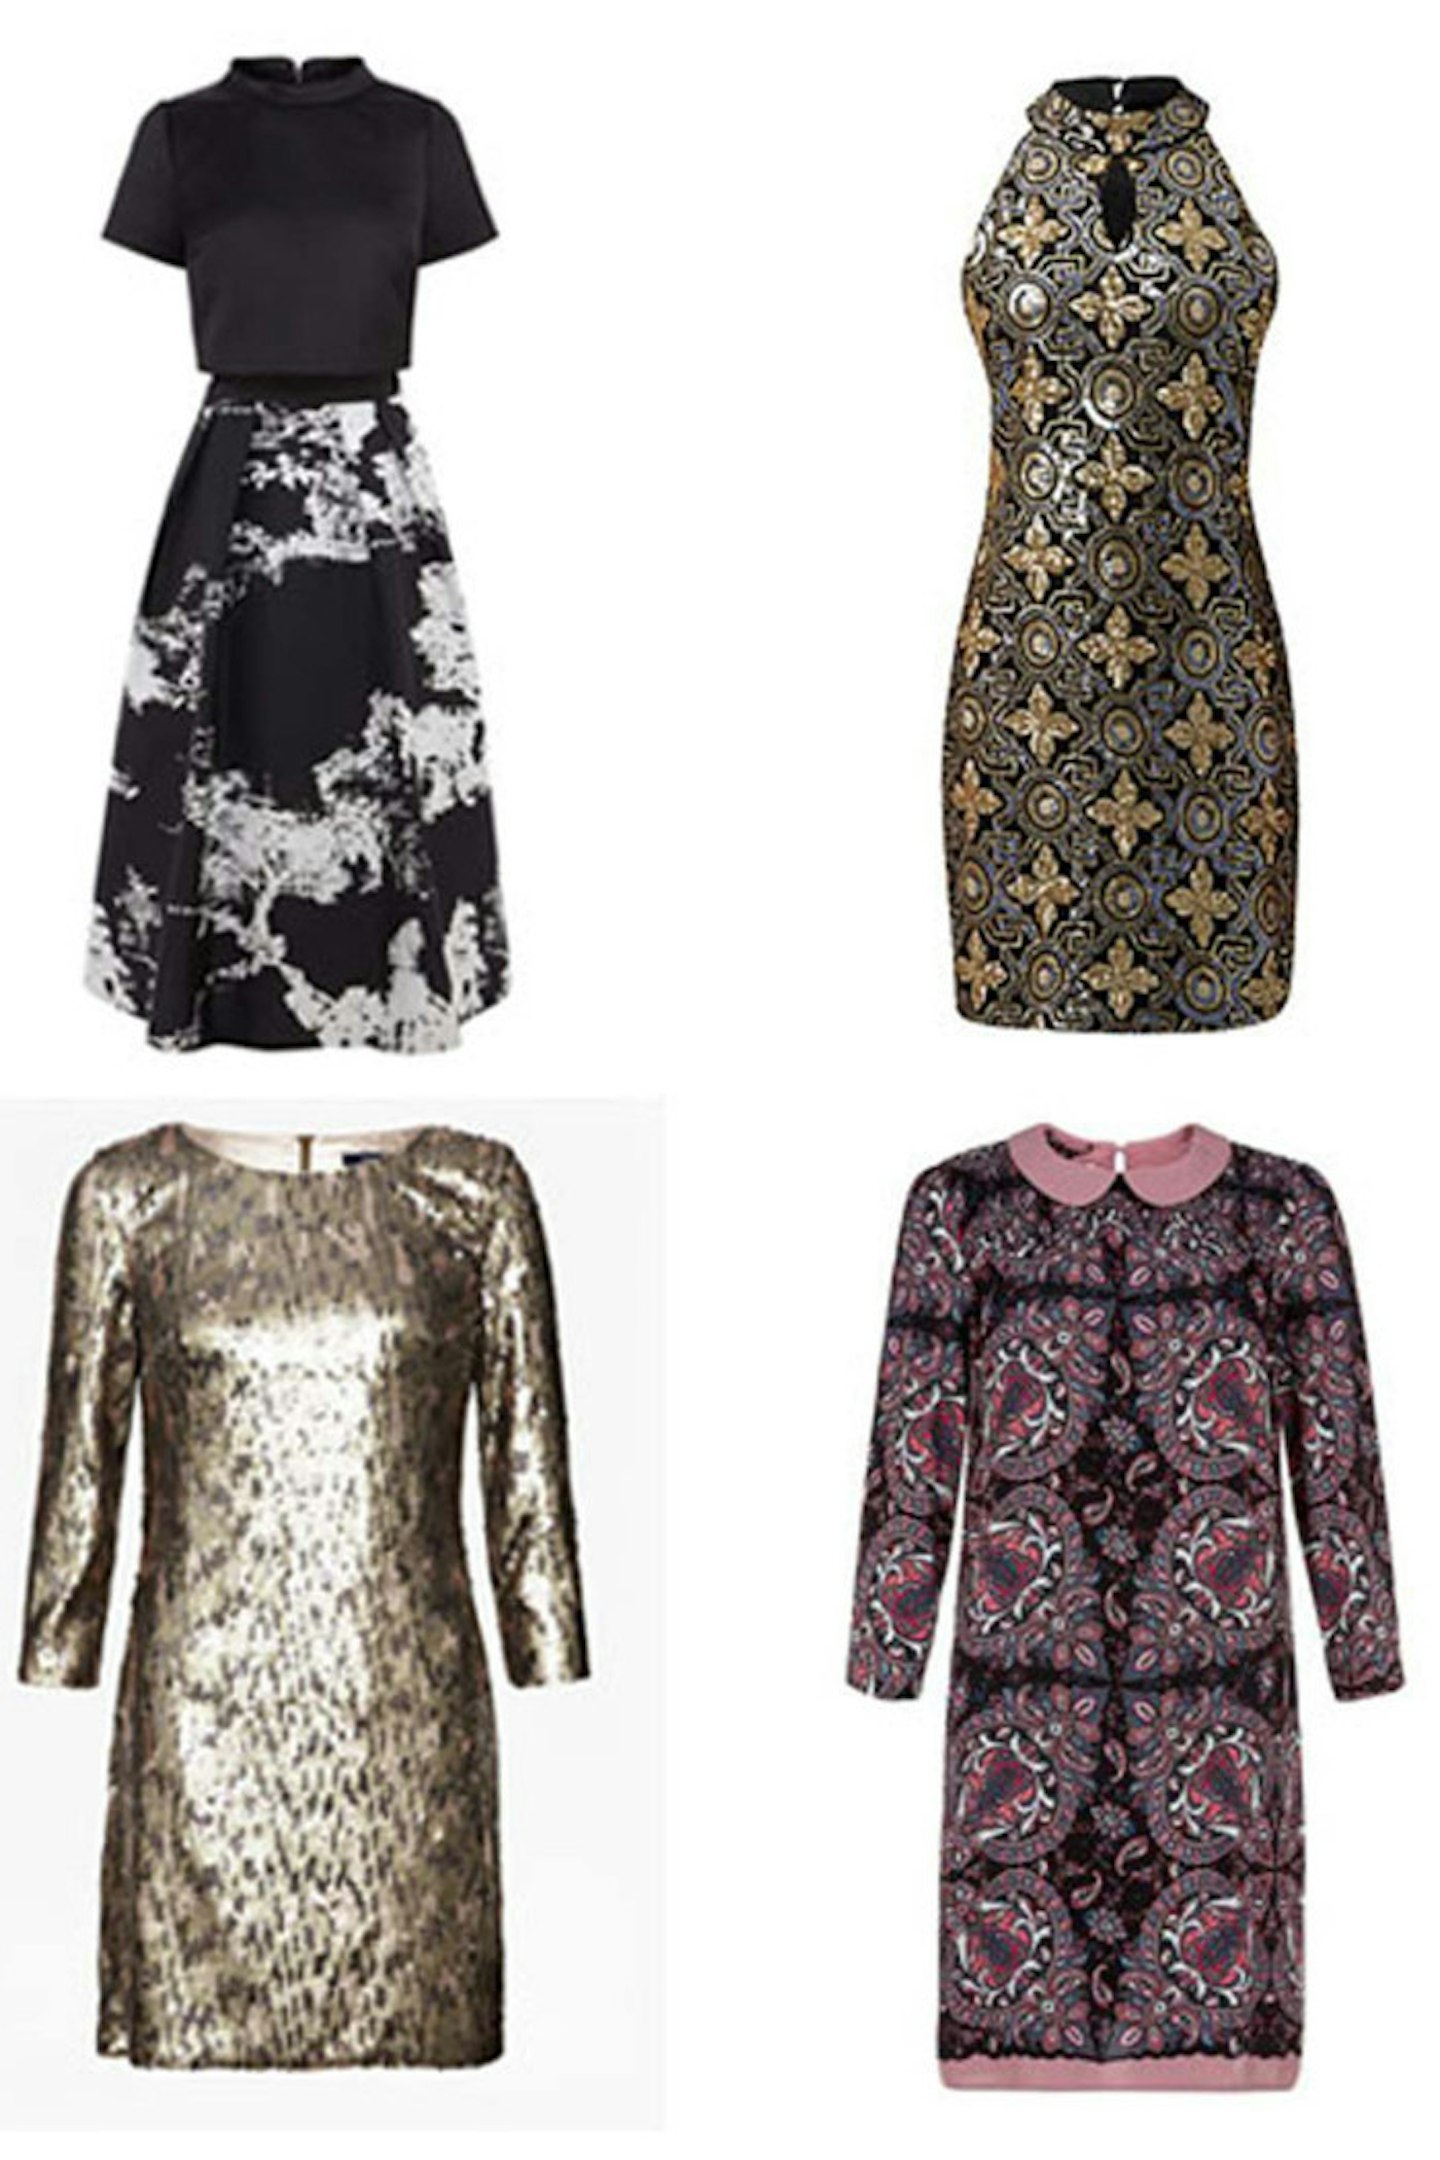 GALLERY >> 20 High-Street Party Dresses